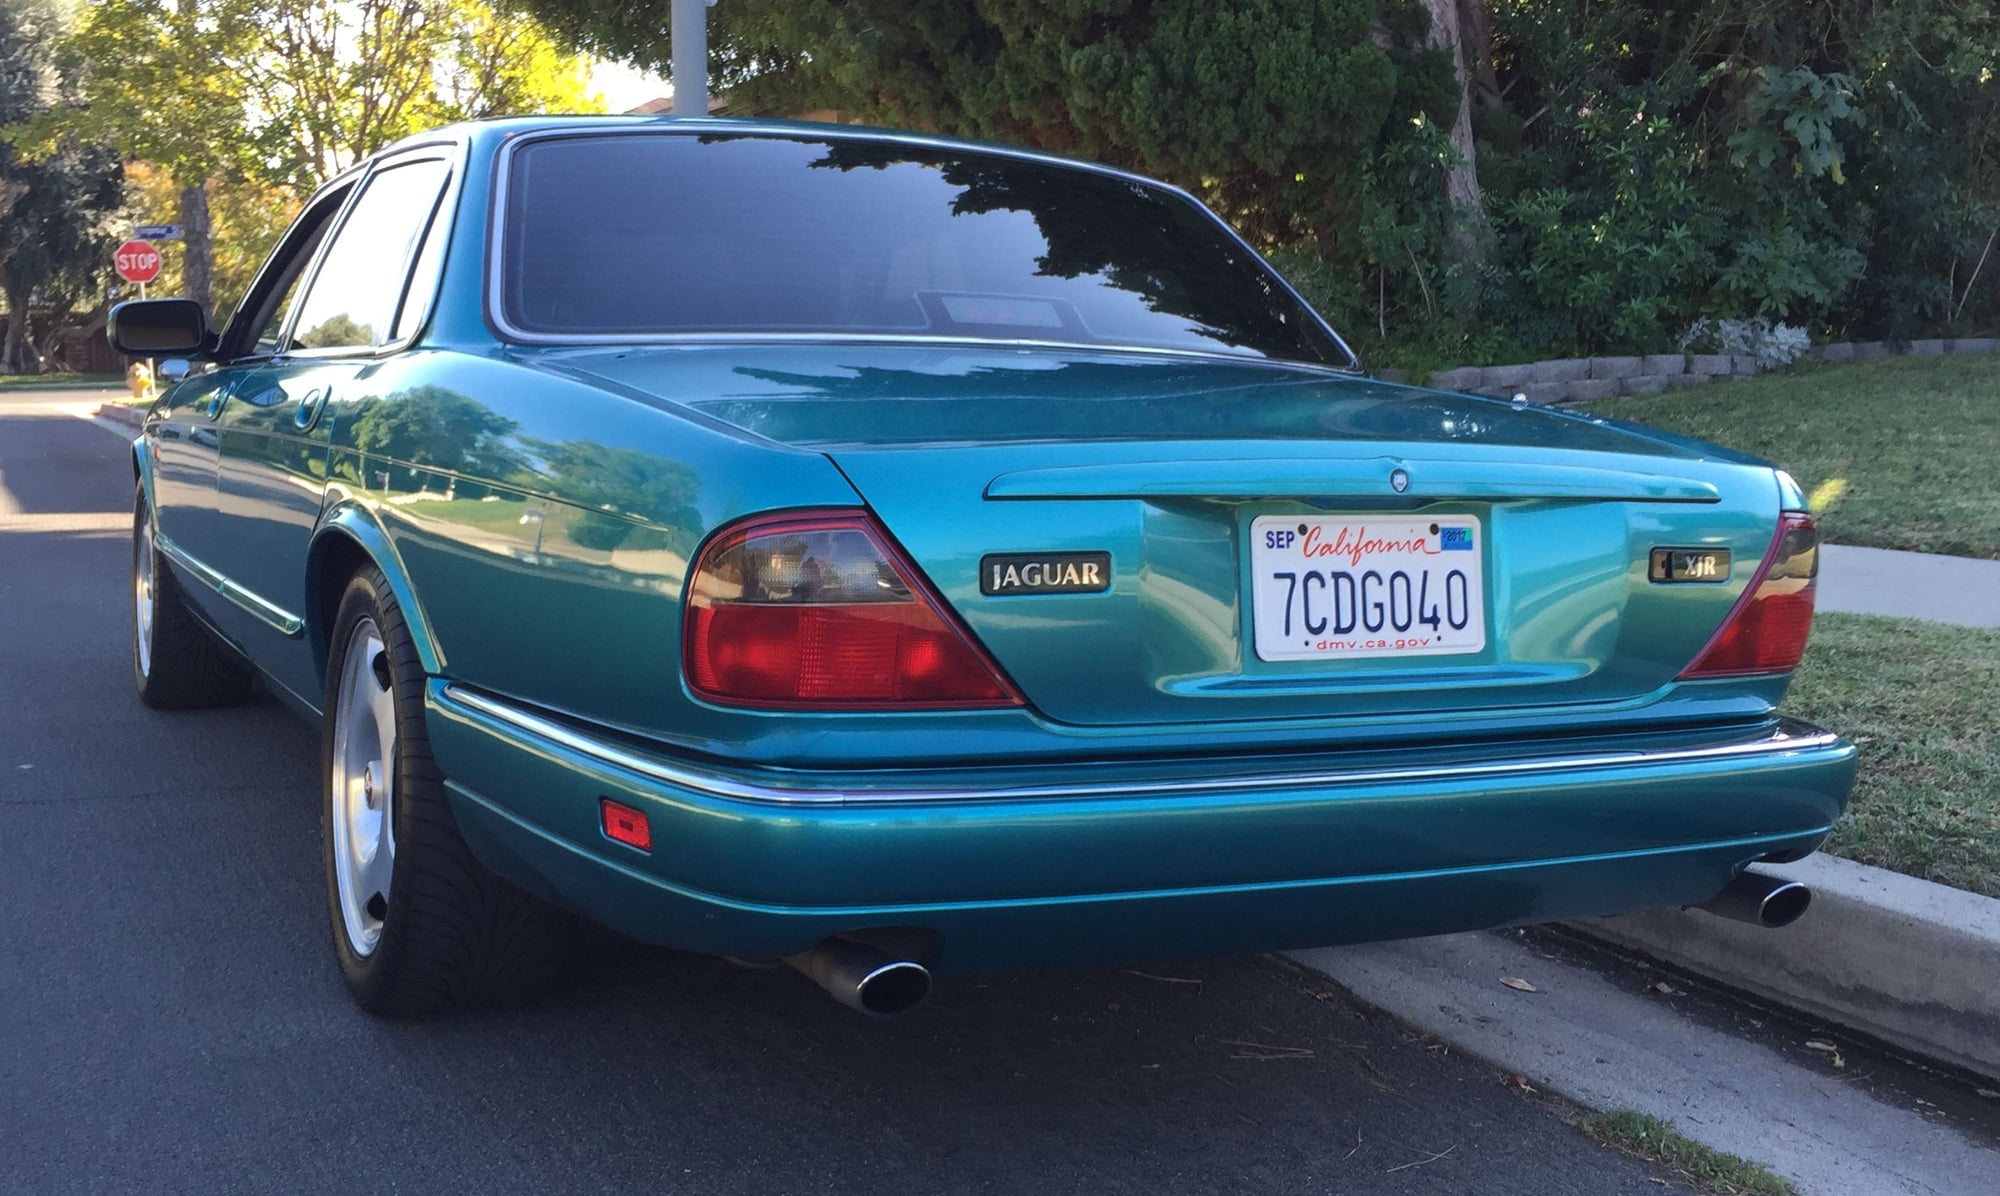 1995 Jaguar XJR - 1995 Jaguar XJR supercharged - one family owned - beautiful - Used - VIN SAJPX1143SC728030 - 67,000 Miles - 6 cyl - 2WD - Automatic - Sedan - Blue - Los Angeles, CA 91304, United States